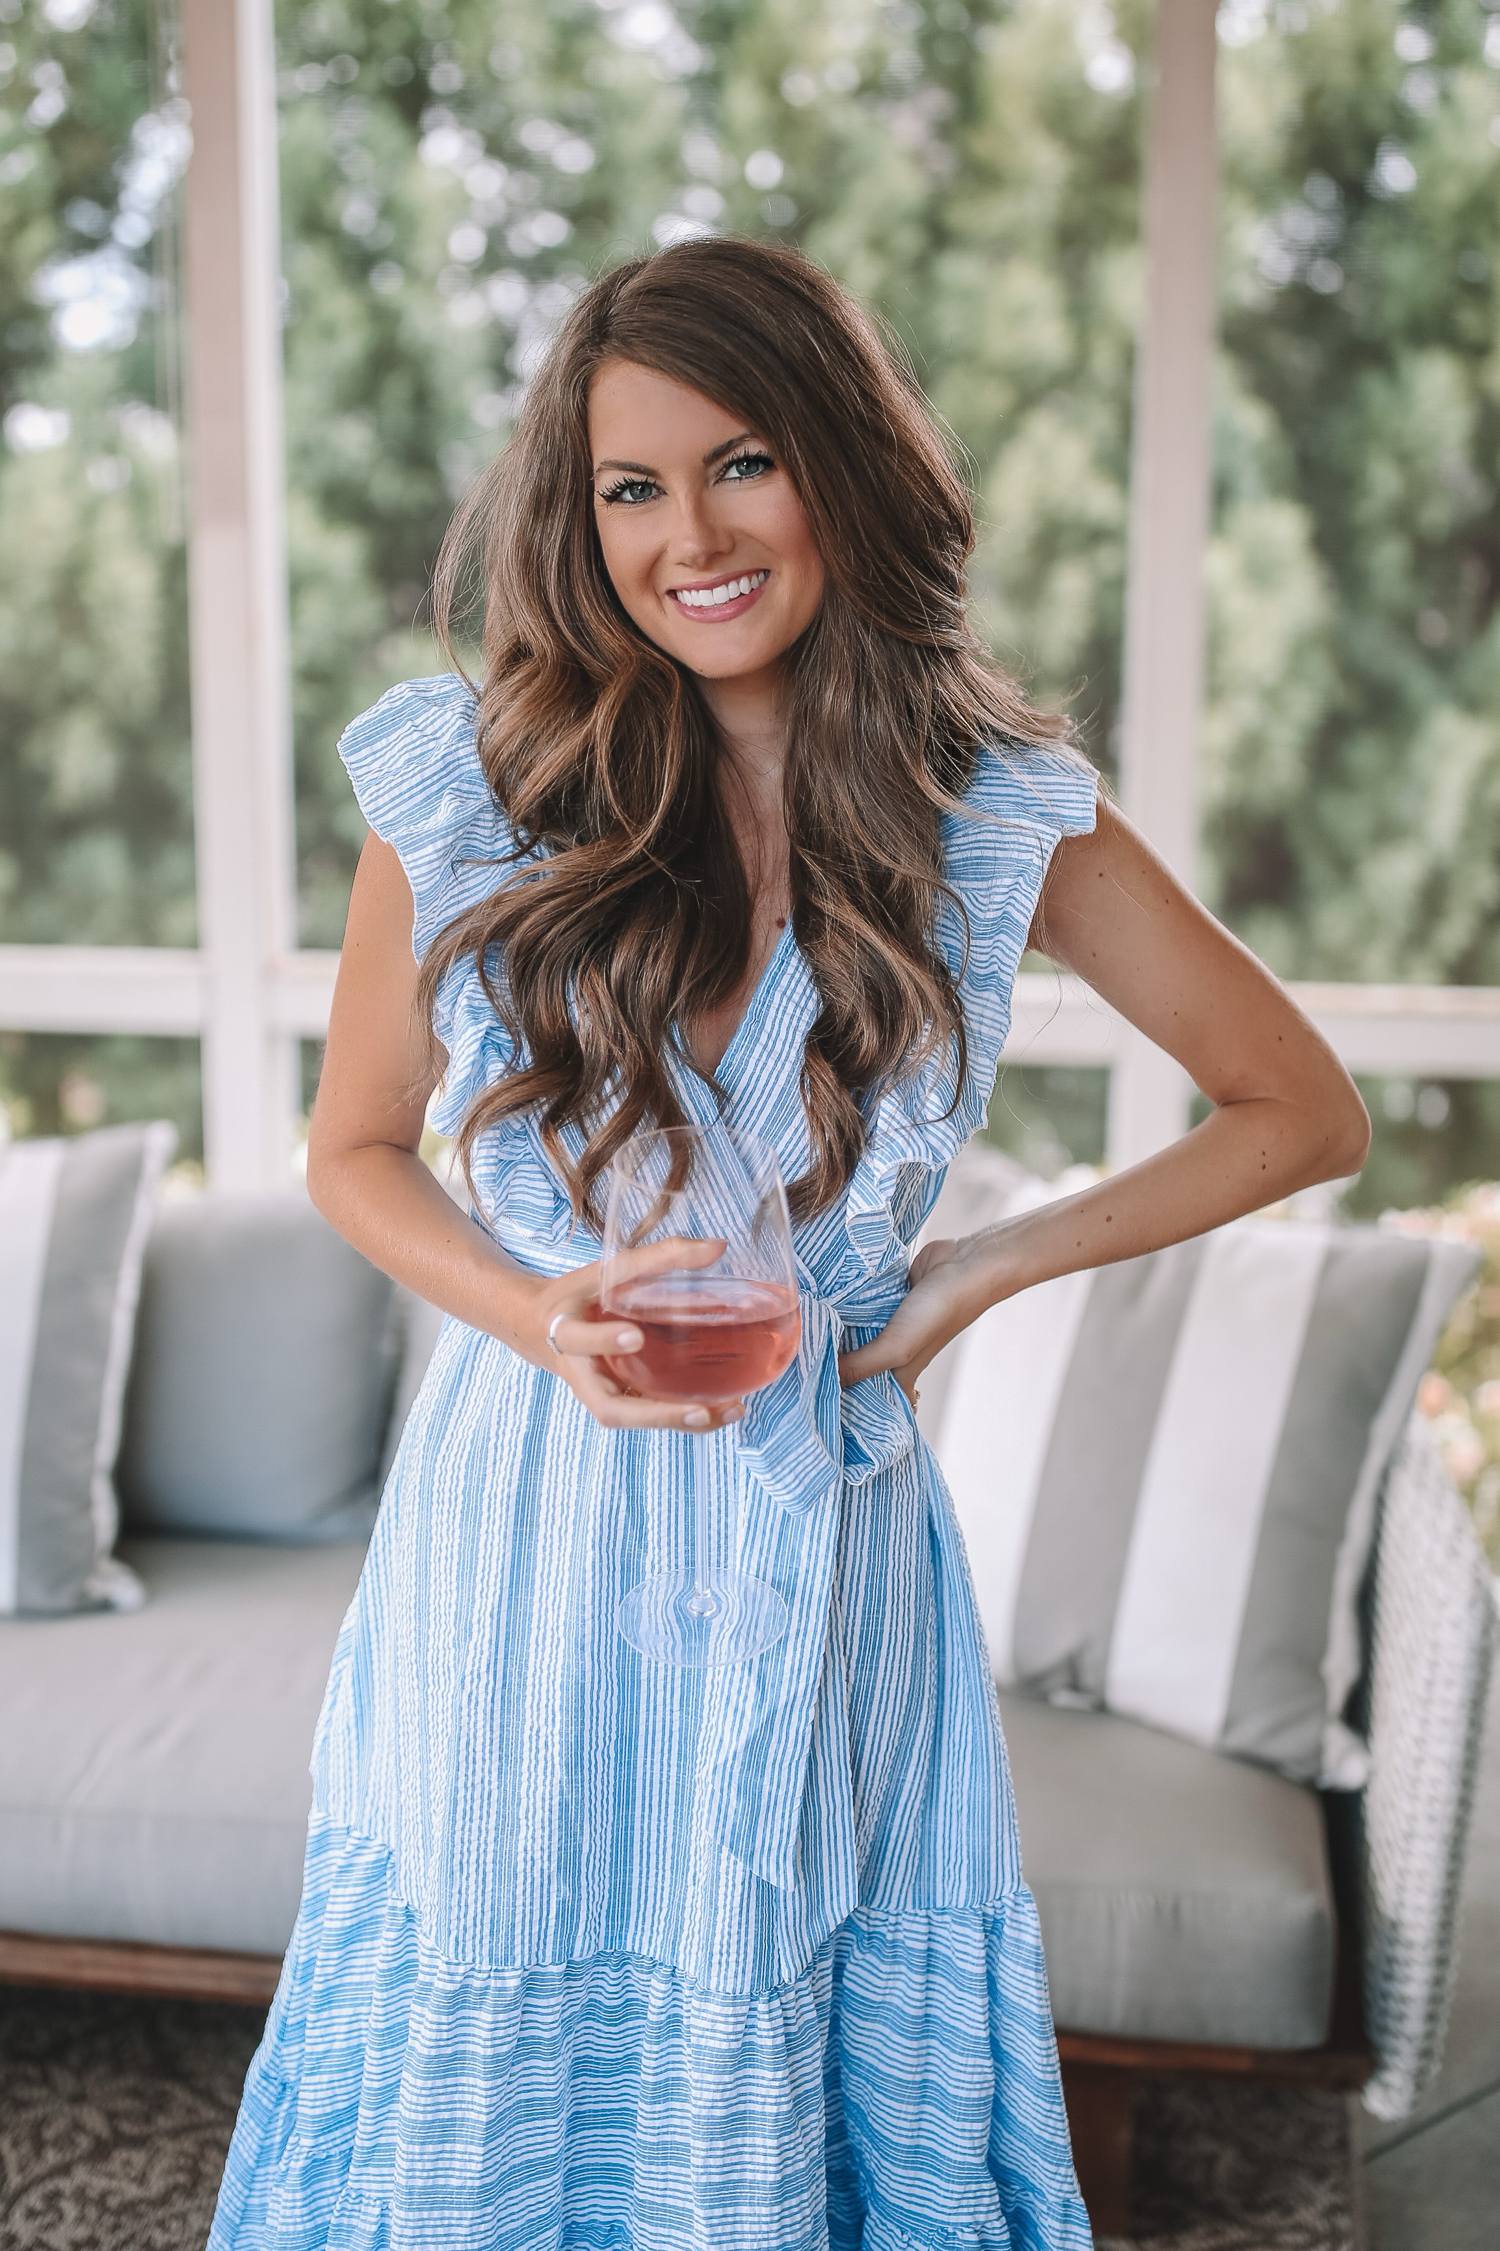 https://www.southerncurlsandpearls.com/wp-content/uploads/2020/06/amazon-fashion-finds-blue-and-white-striped-dress-ruffle-sleeves-6.jpg